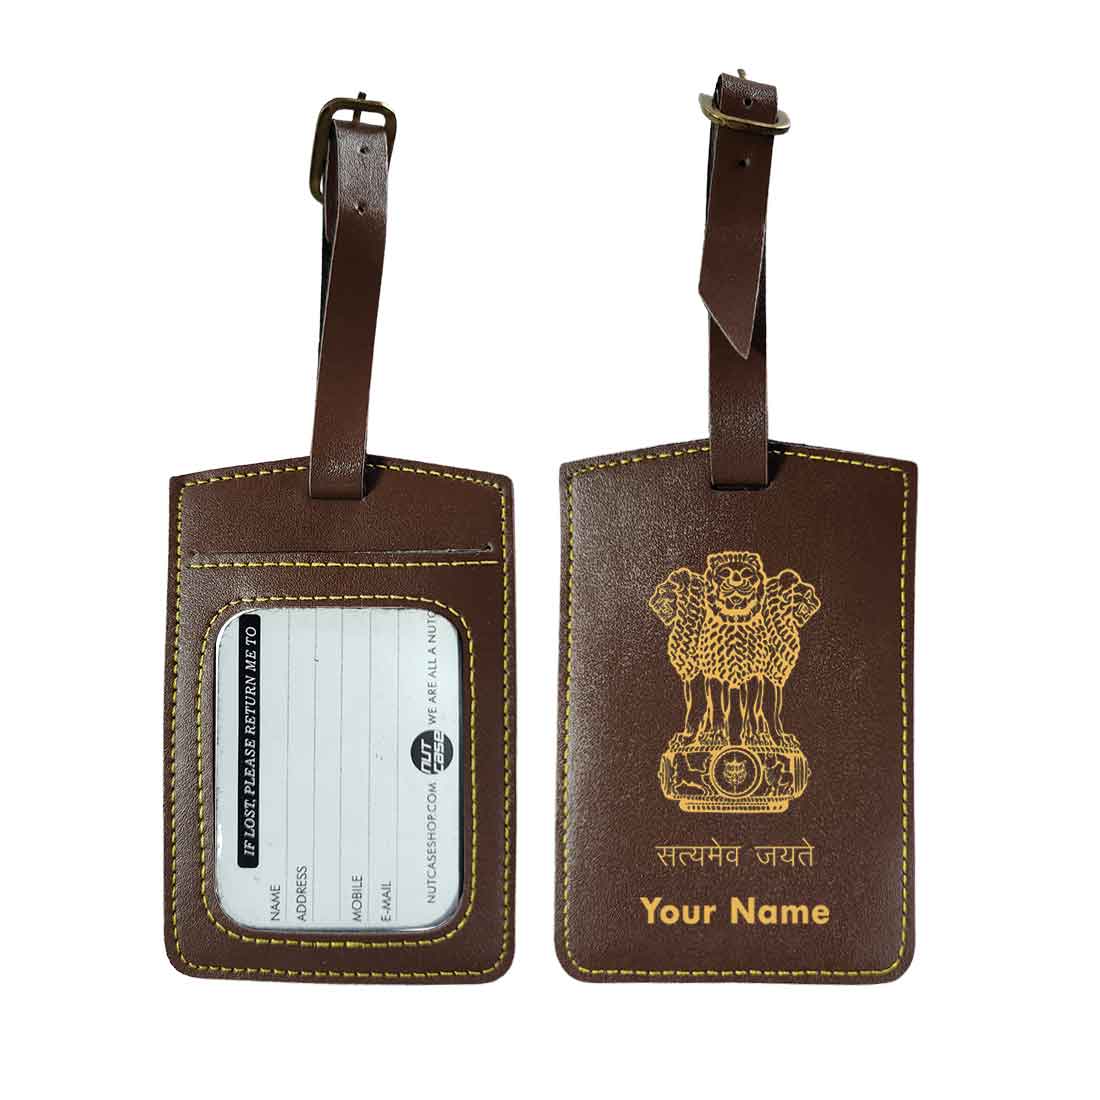 Customized Passport Holder Cover Travel Wallet Case-INDIAN PASSPORT STYLE-MULTICOLOR